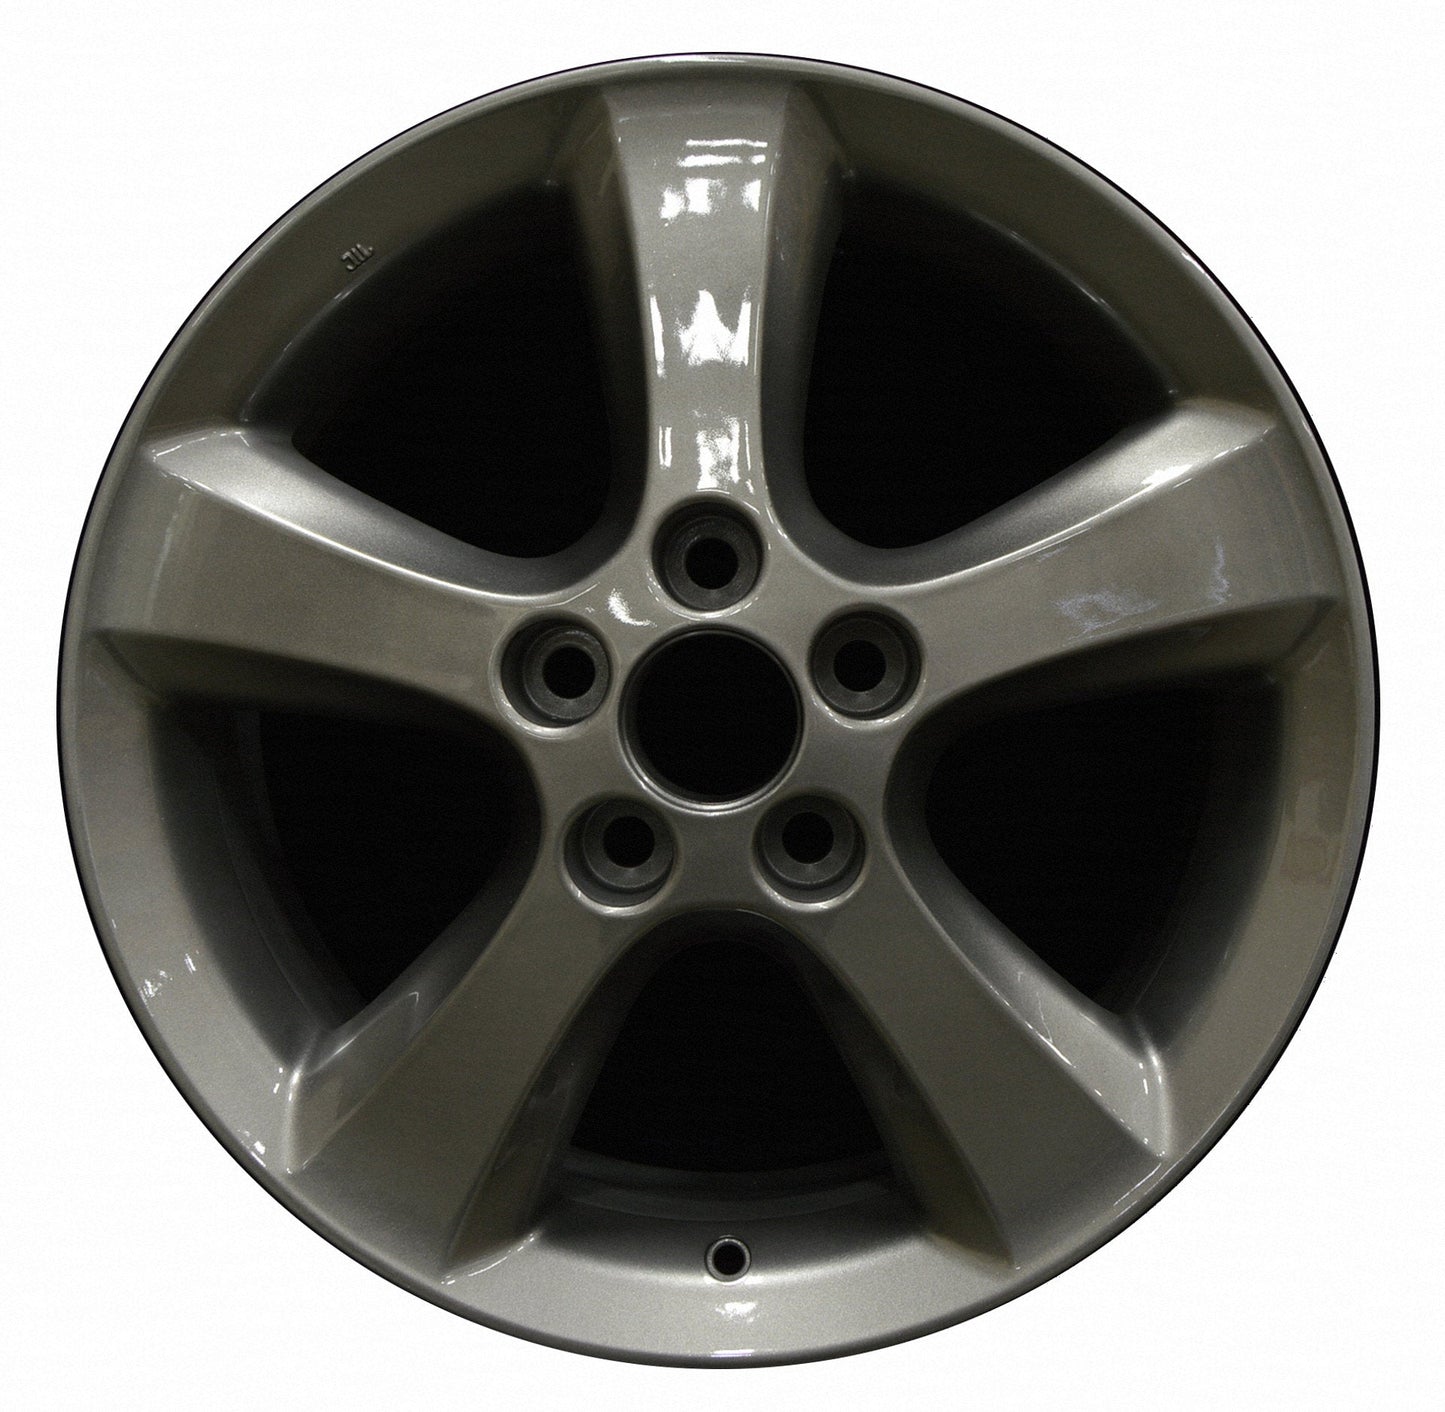 Toyota Camry  2005, 2006, 2007, 2008, 2009 Factory OEM Car Wheel Size 17x7 Alloy WAO.69452.LC13.FF